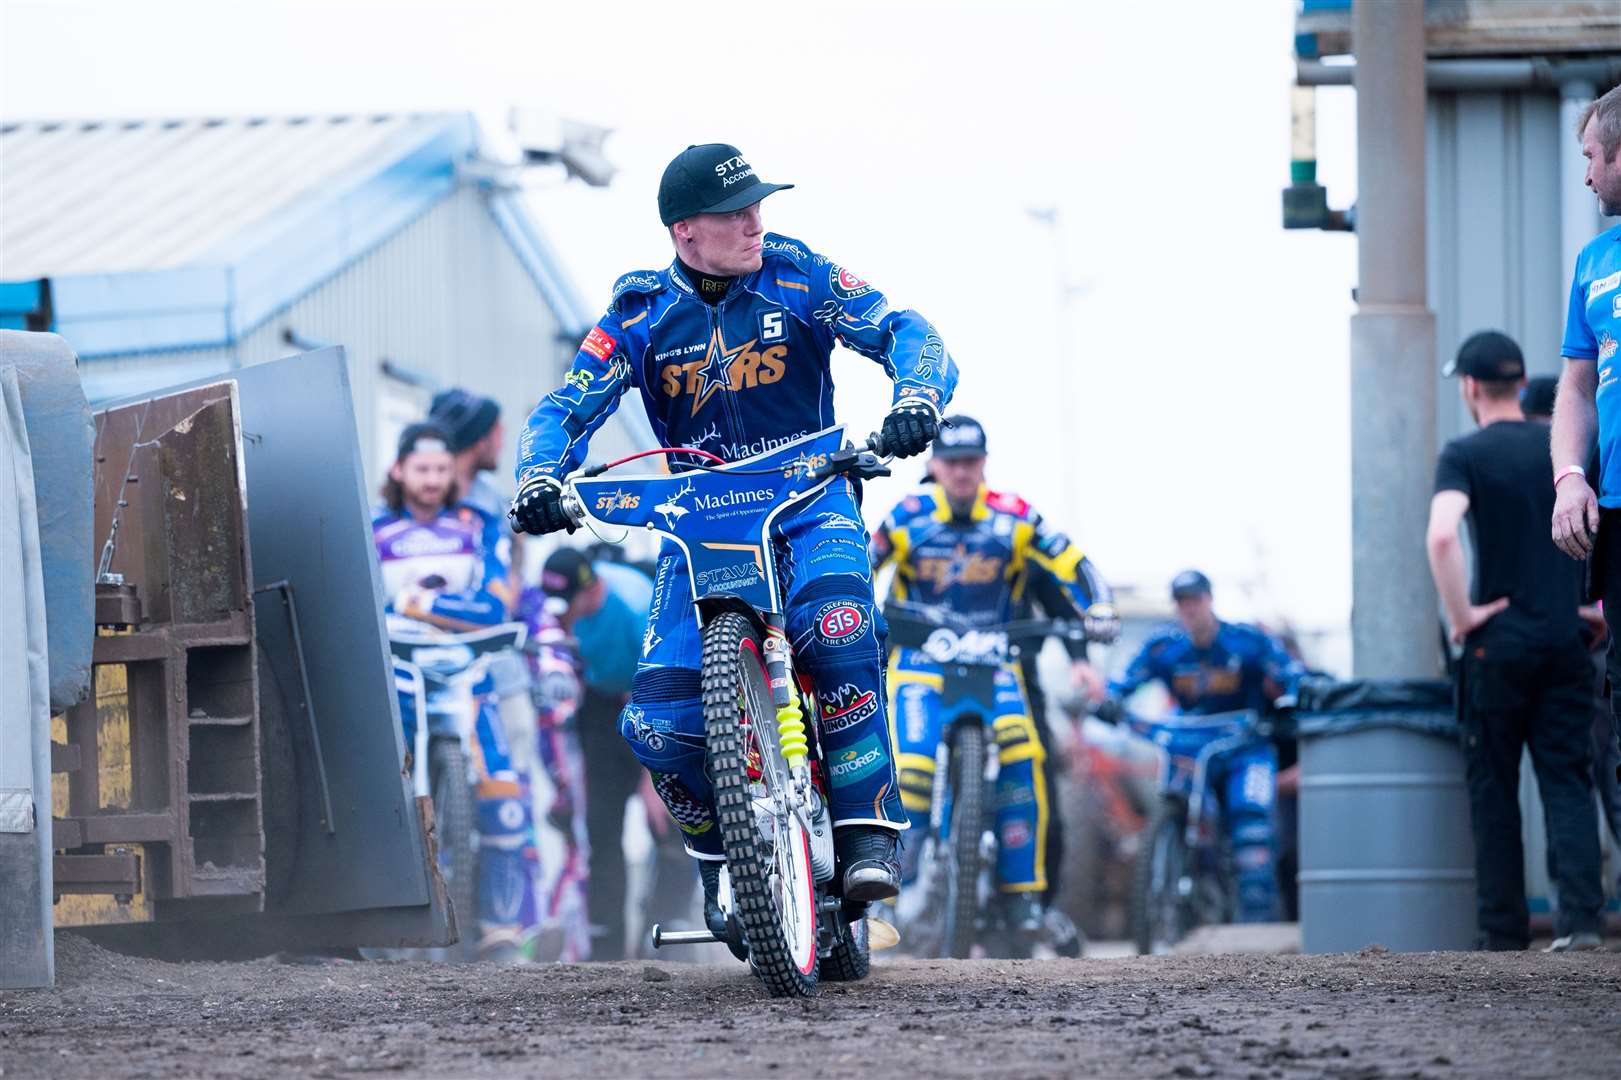 Michael Palm-Toft heads out on the parade lap. Picture: Ian Burt